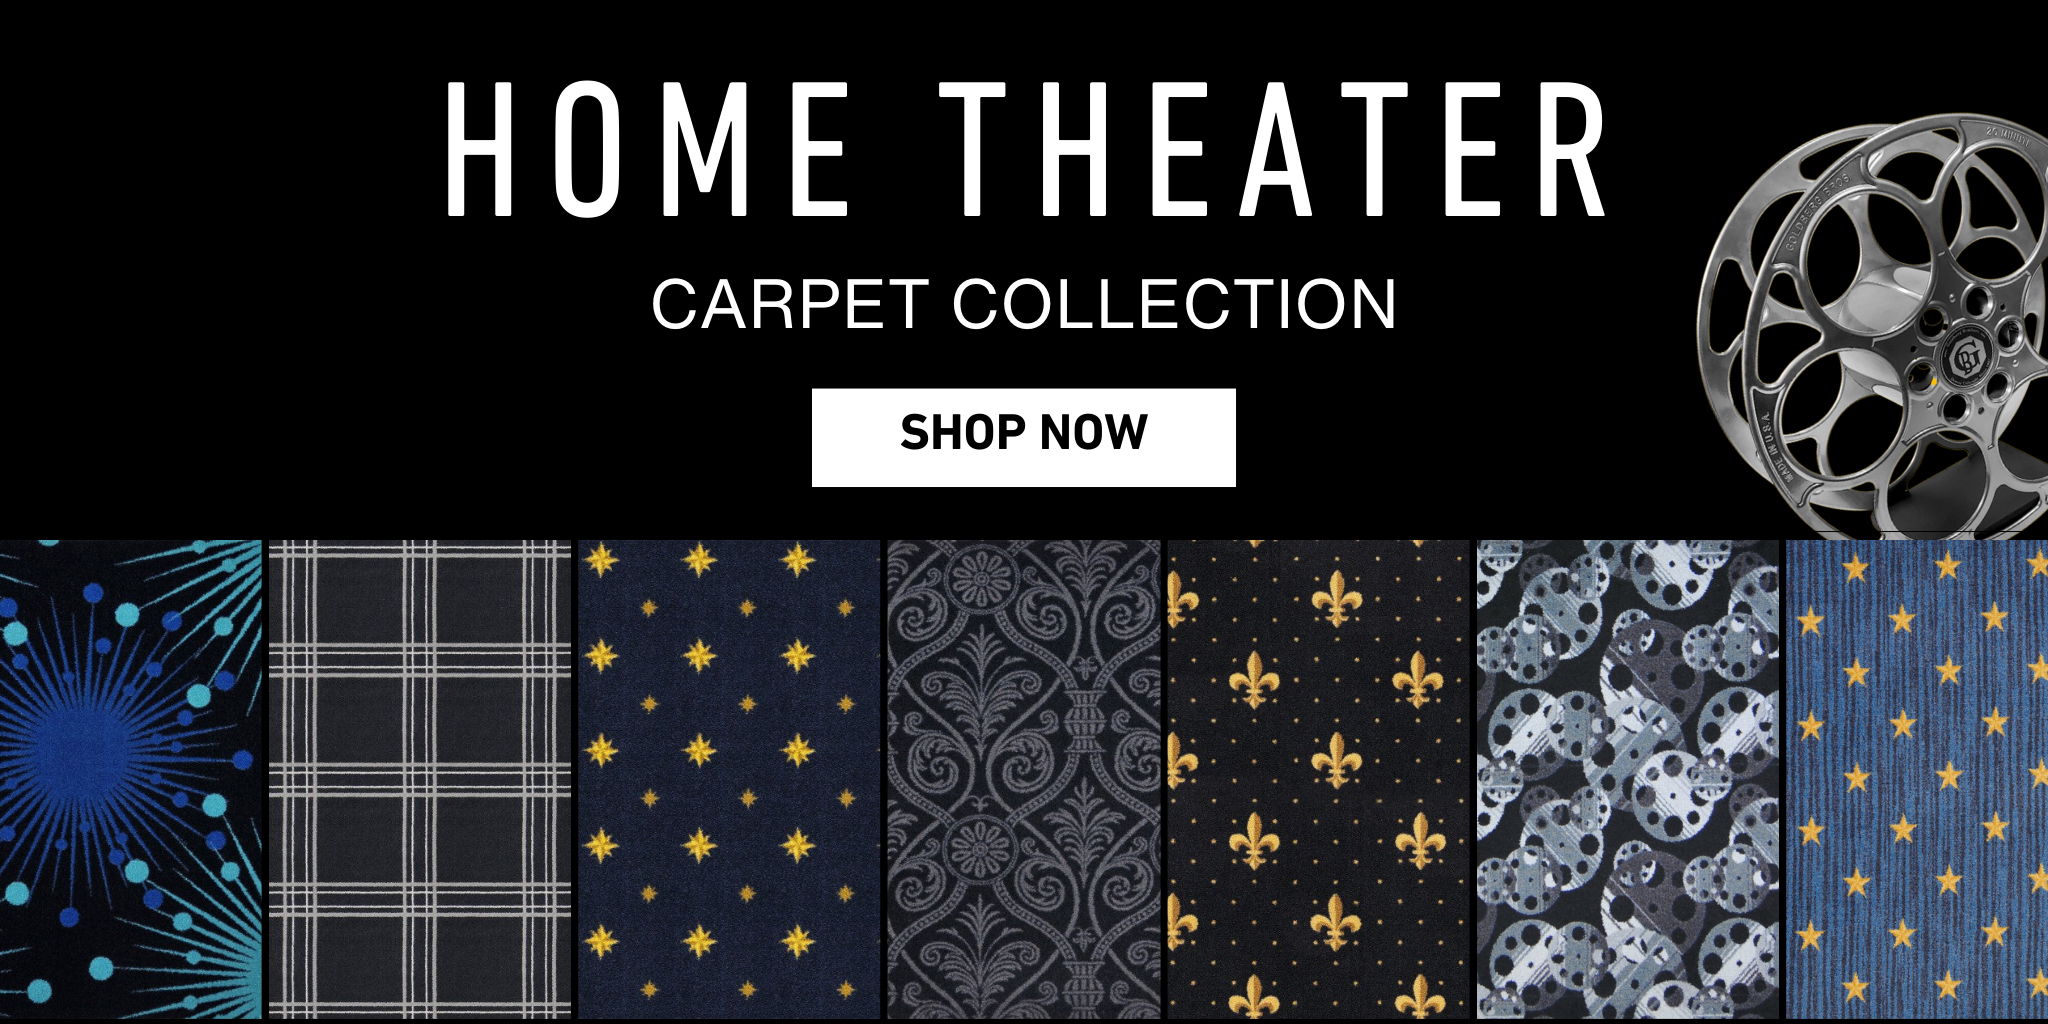  Shop the Home Theater Carpet Collection from Home Theater Mart | Based out of Chicago, Illinois